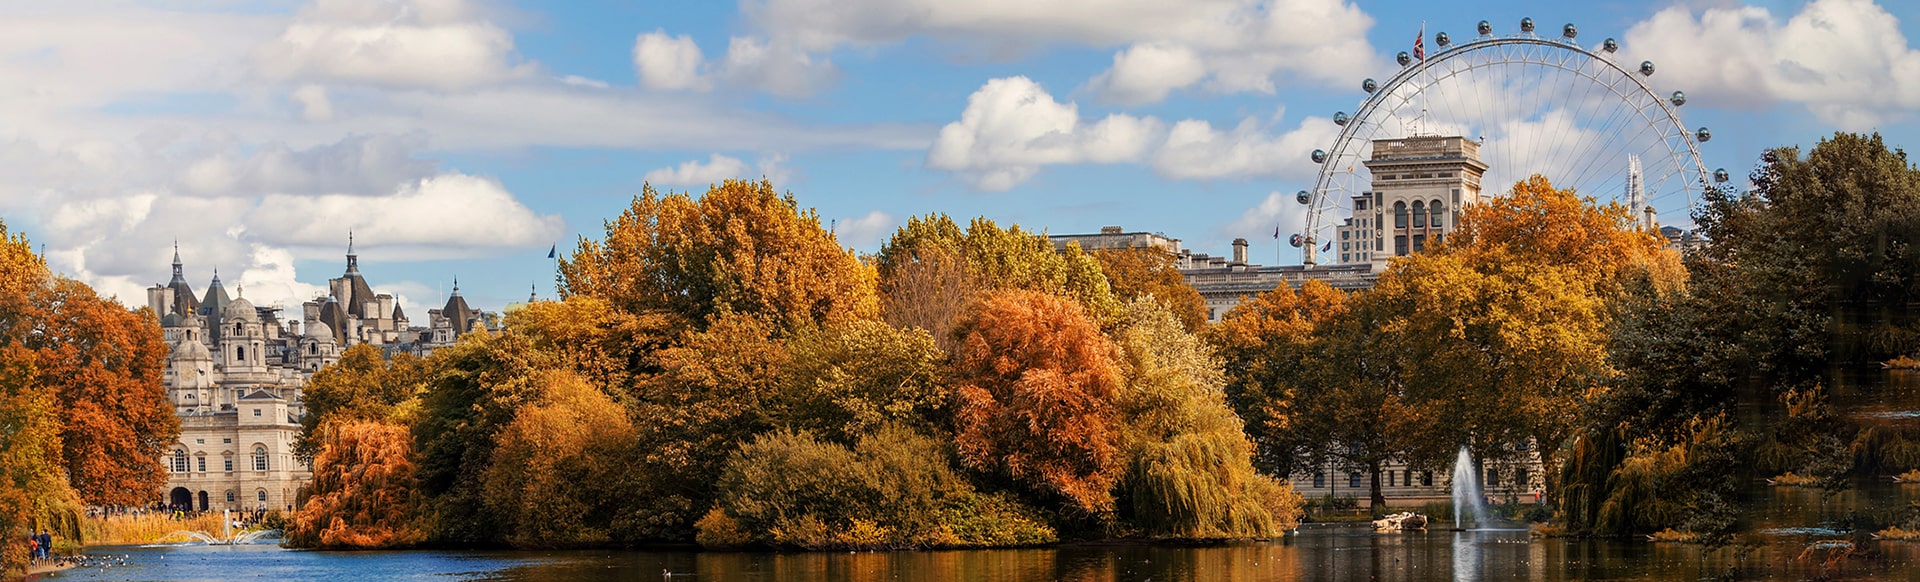 St James Park in autumn with the London Eye in the background on a sunny day